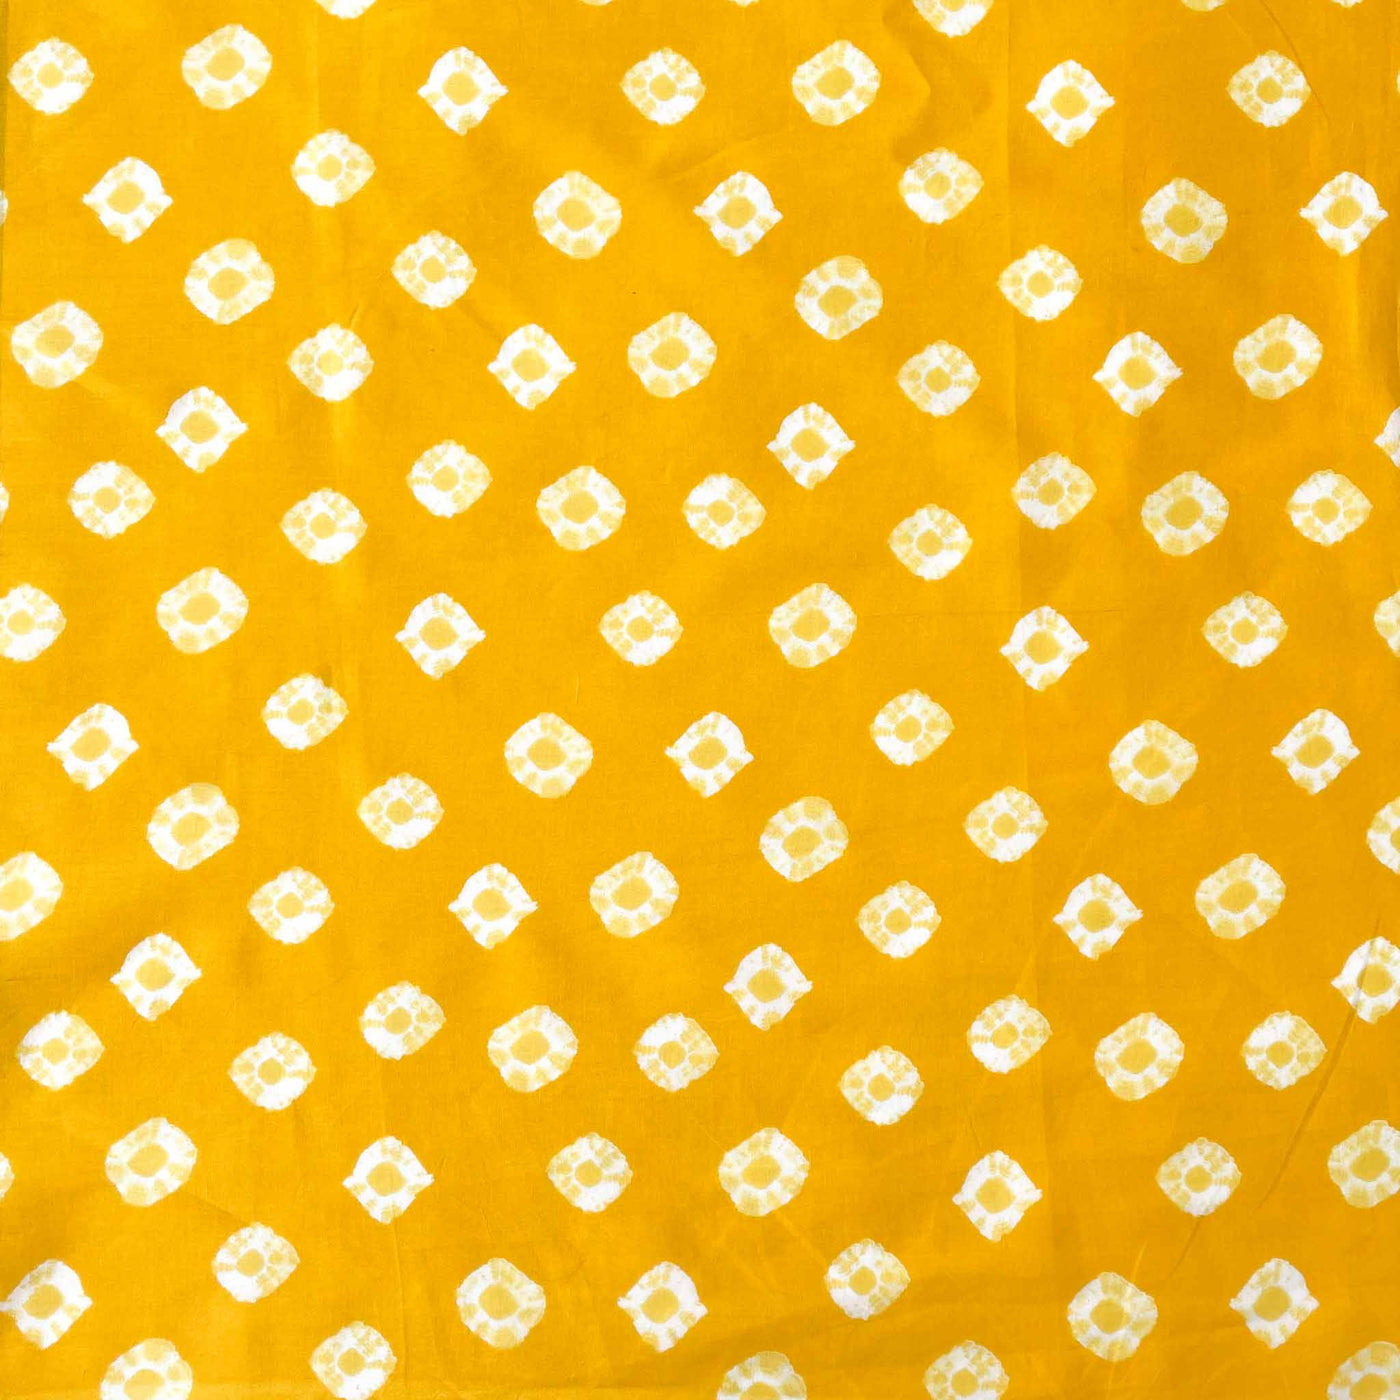 Fabric Pandit Cut Piece (CUT PIECE) Happy Yellow Batik Natural Dyed Diamond Rings Hand Block Printed Pure Cotton Fabric Width (43 inches)